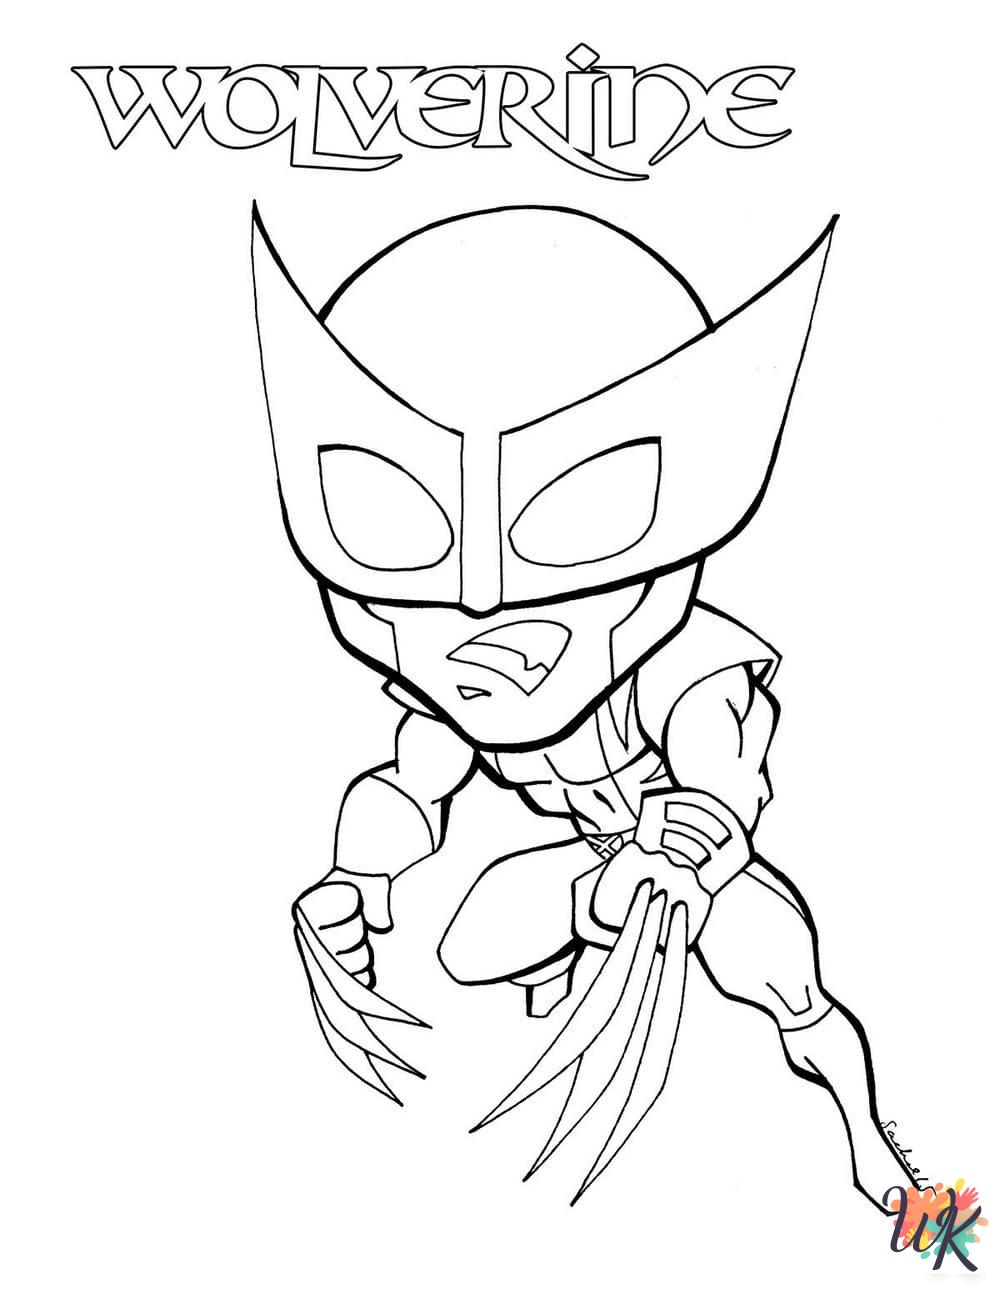 Wolverine adult coloring pages